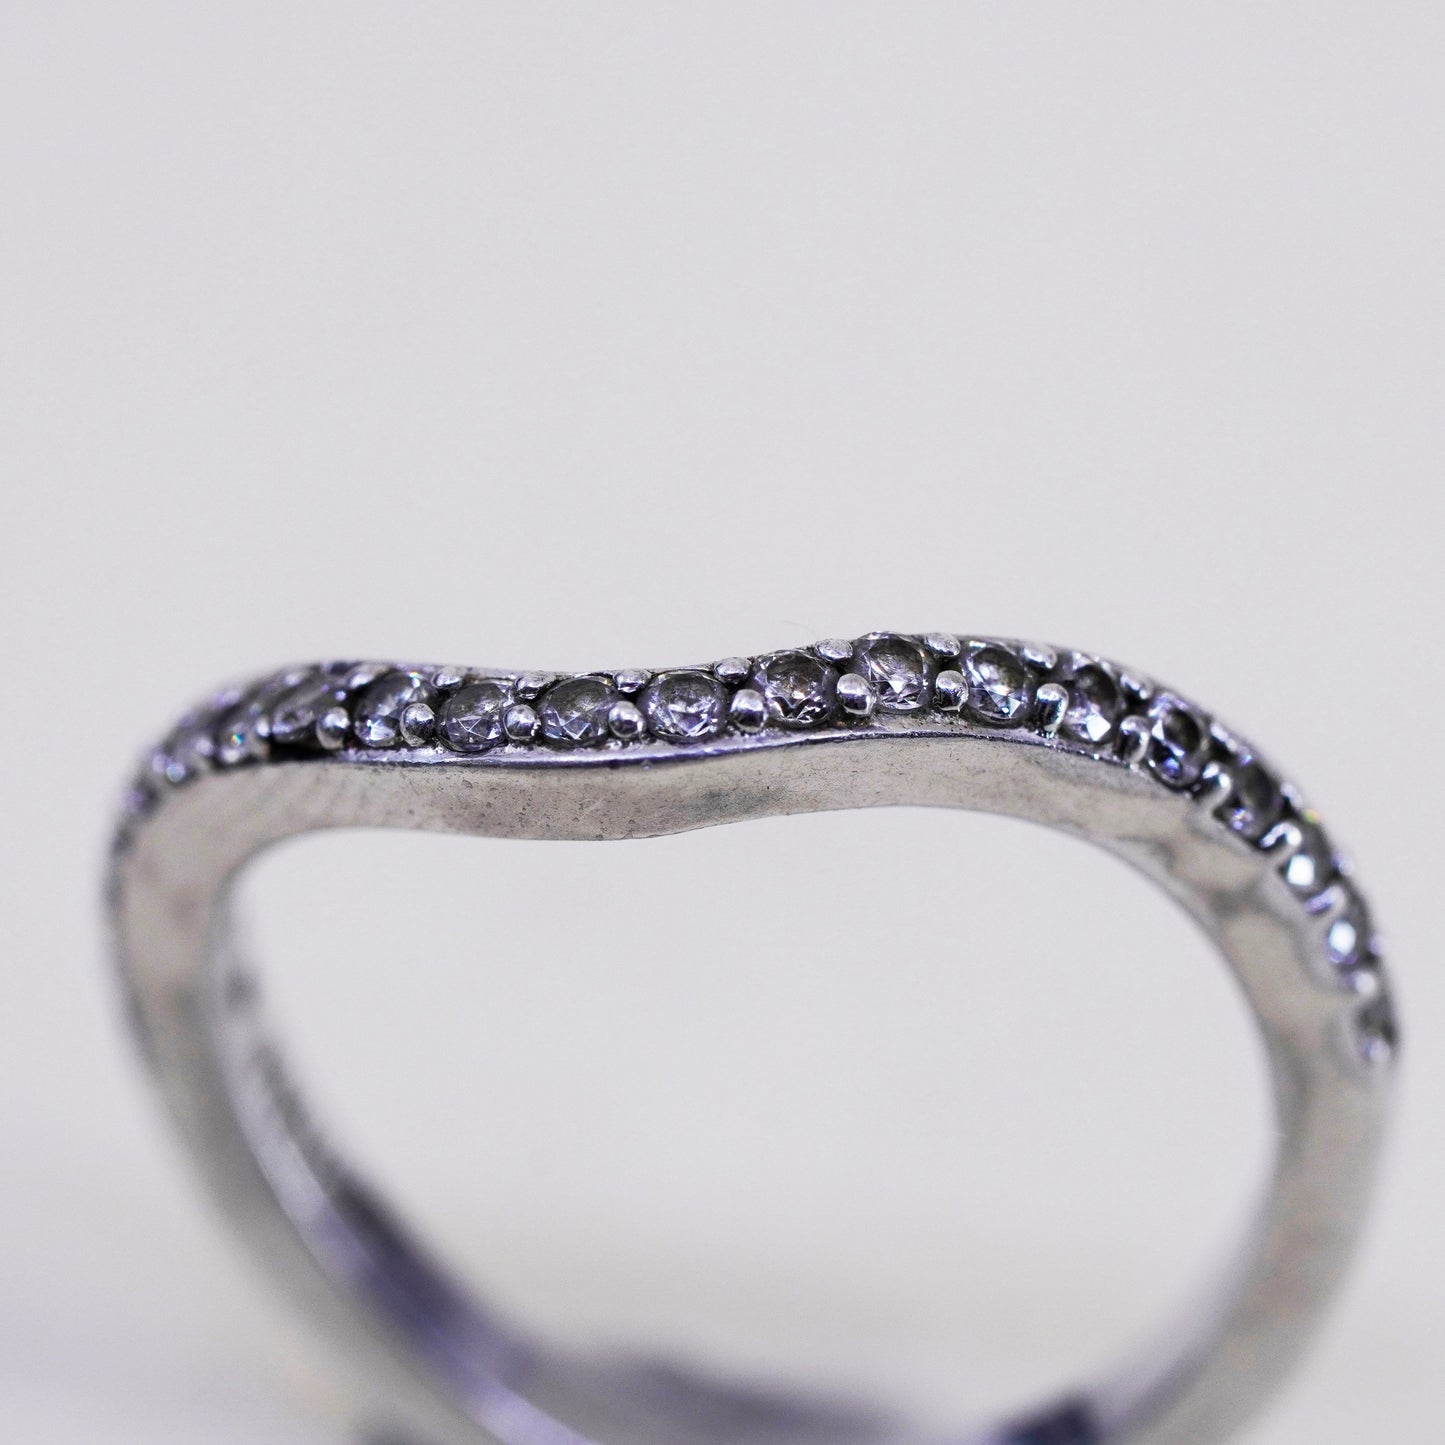 Size 6, Sterling 925 silver statement ring, wavy band with round CZ